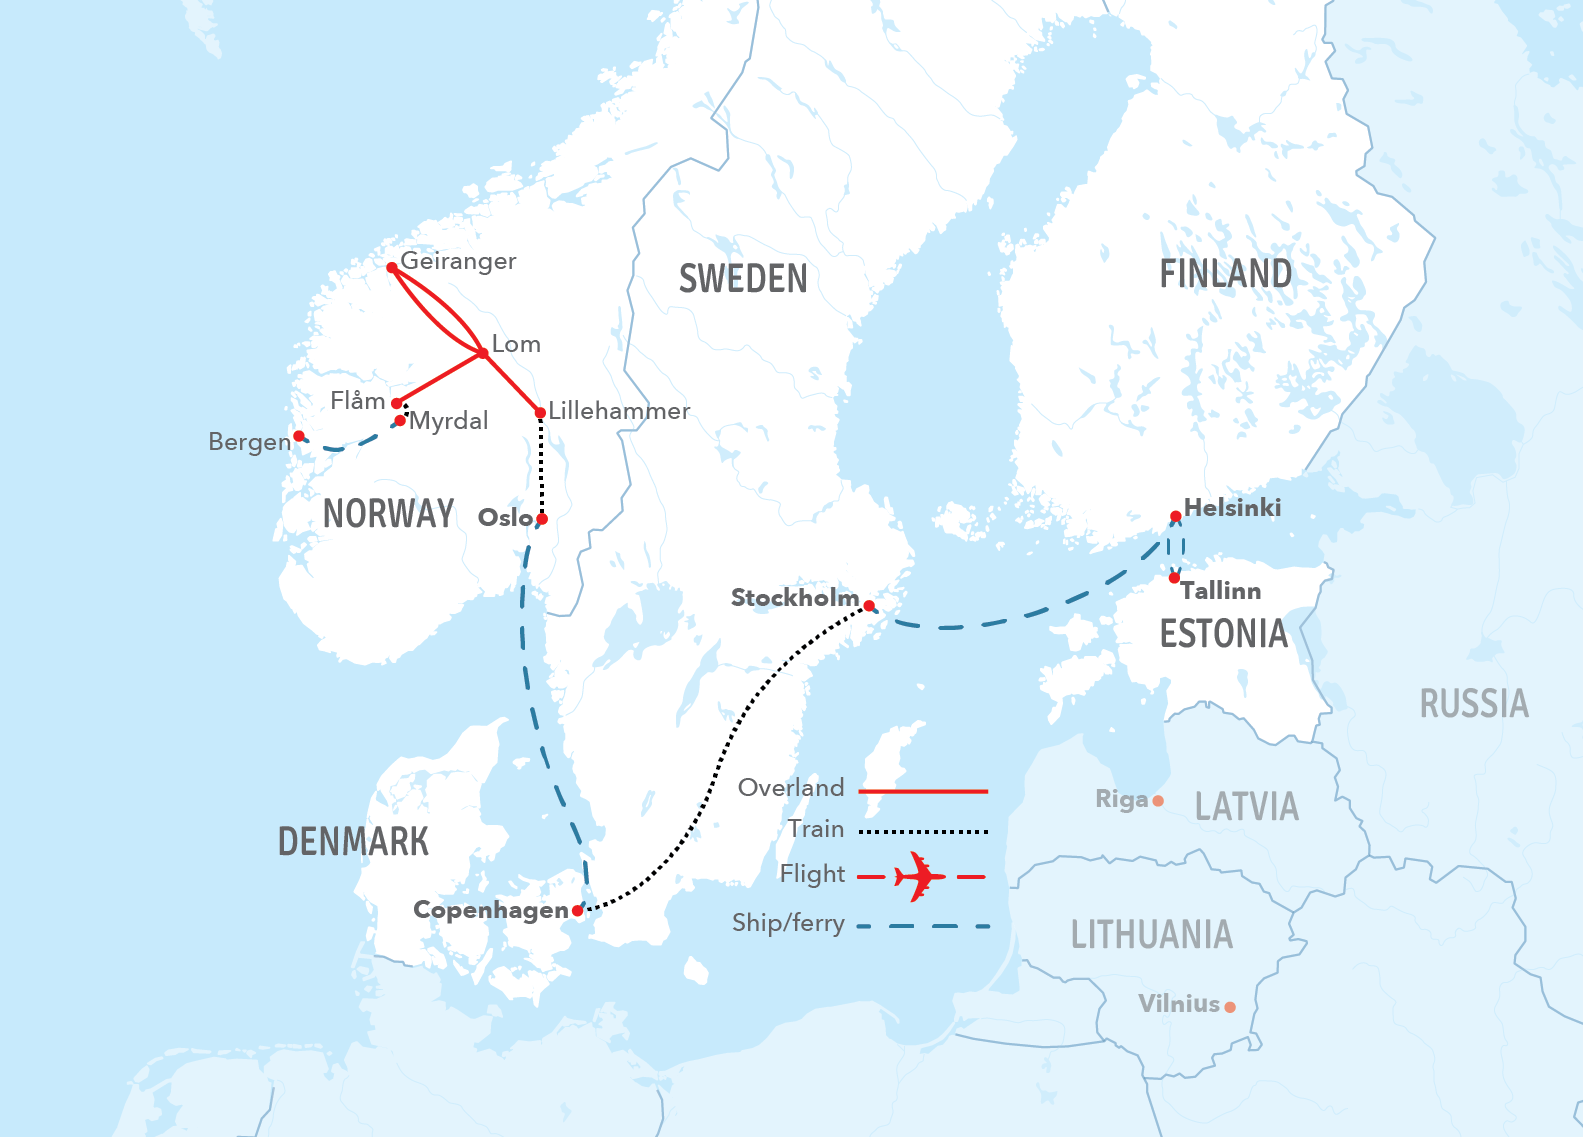 Map of Scandinavia indicating all stops Alon this itinerary 